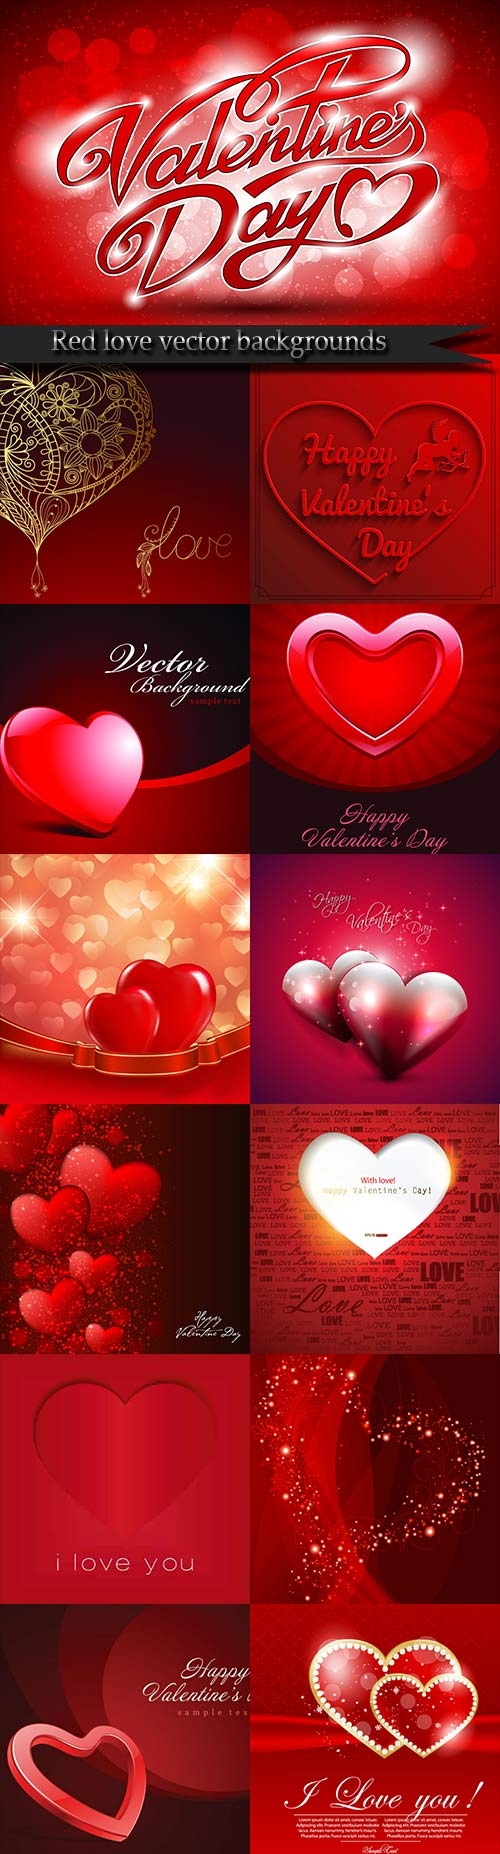 Red love vector backgrounds